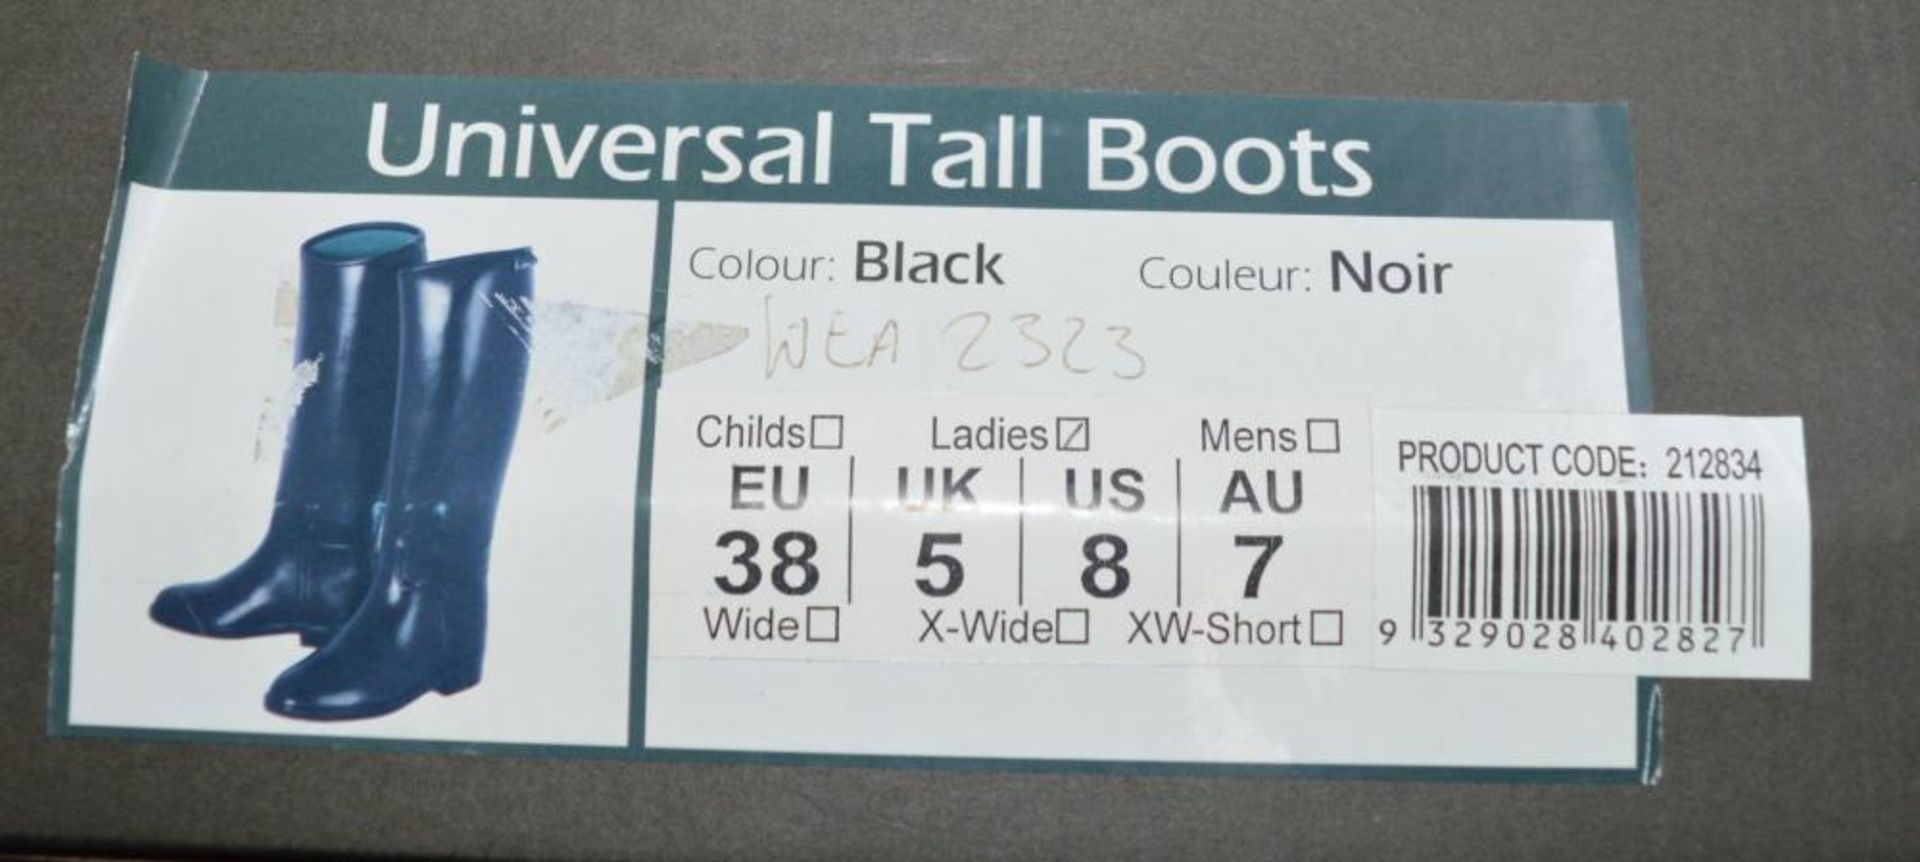 1 x&nbsp;Dublin Universal Tall Waterproof Horse Riding Boots - Black Ladies Size 5 (UK) - New Sto - Image 3 of 4